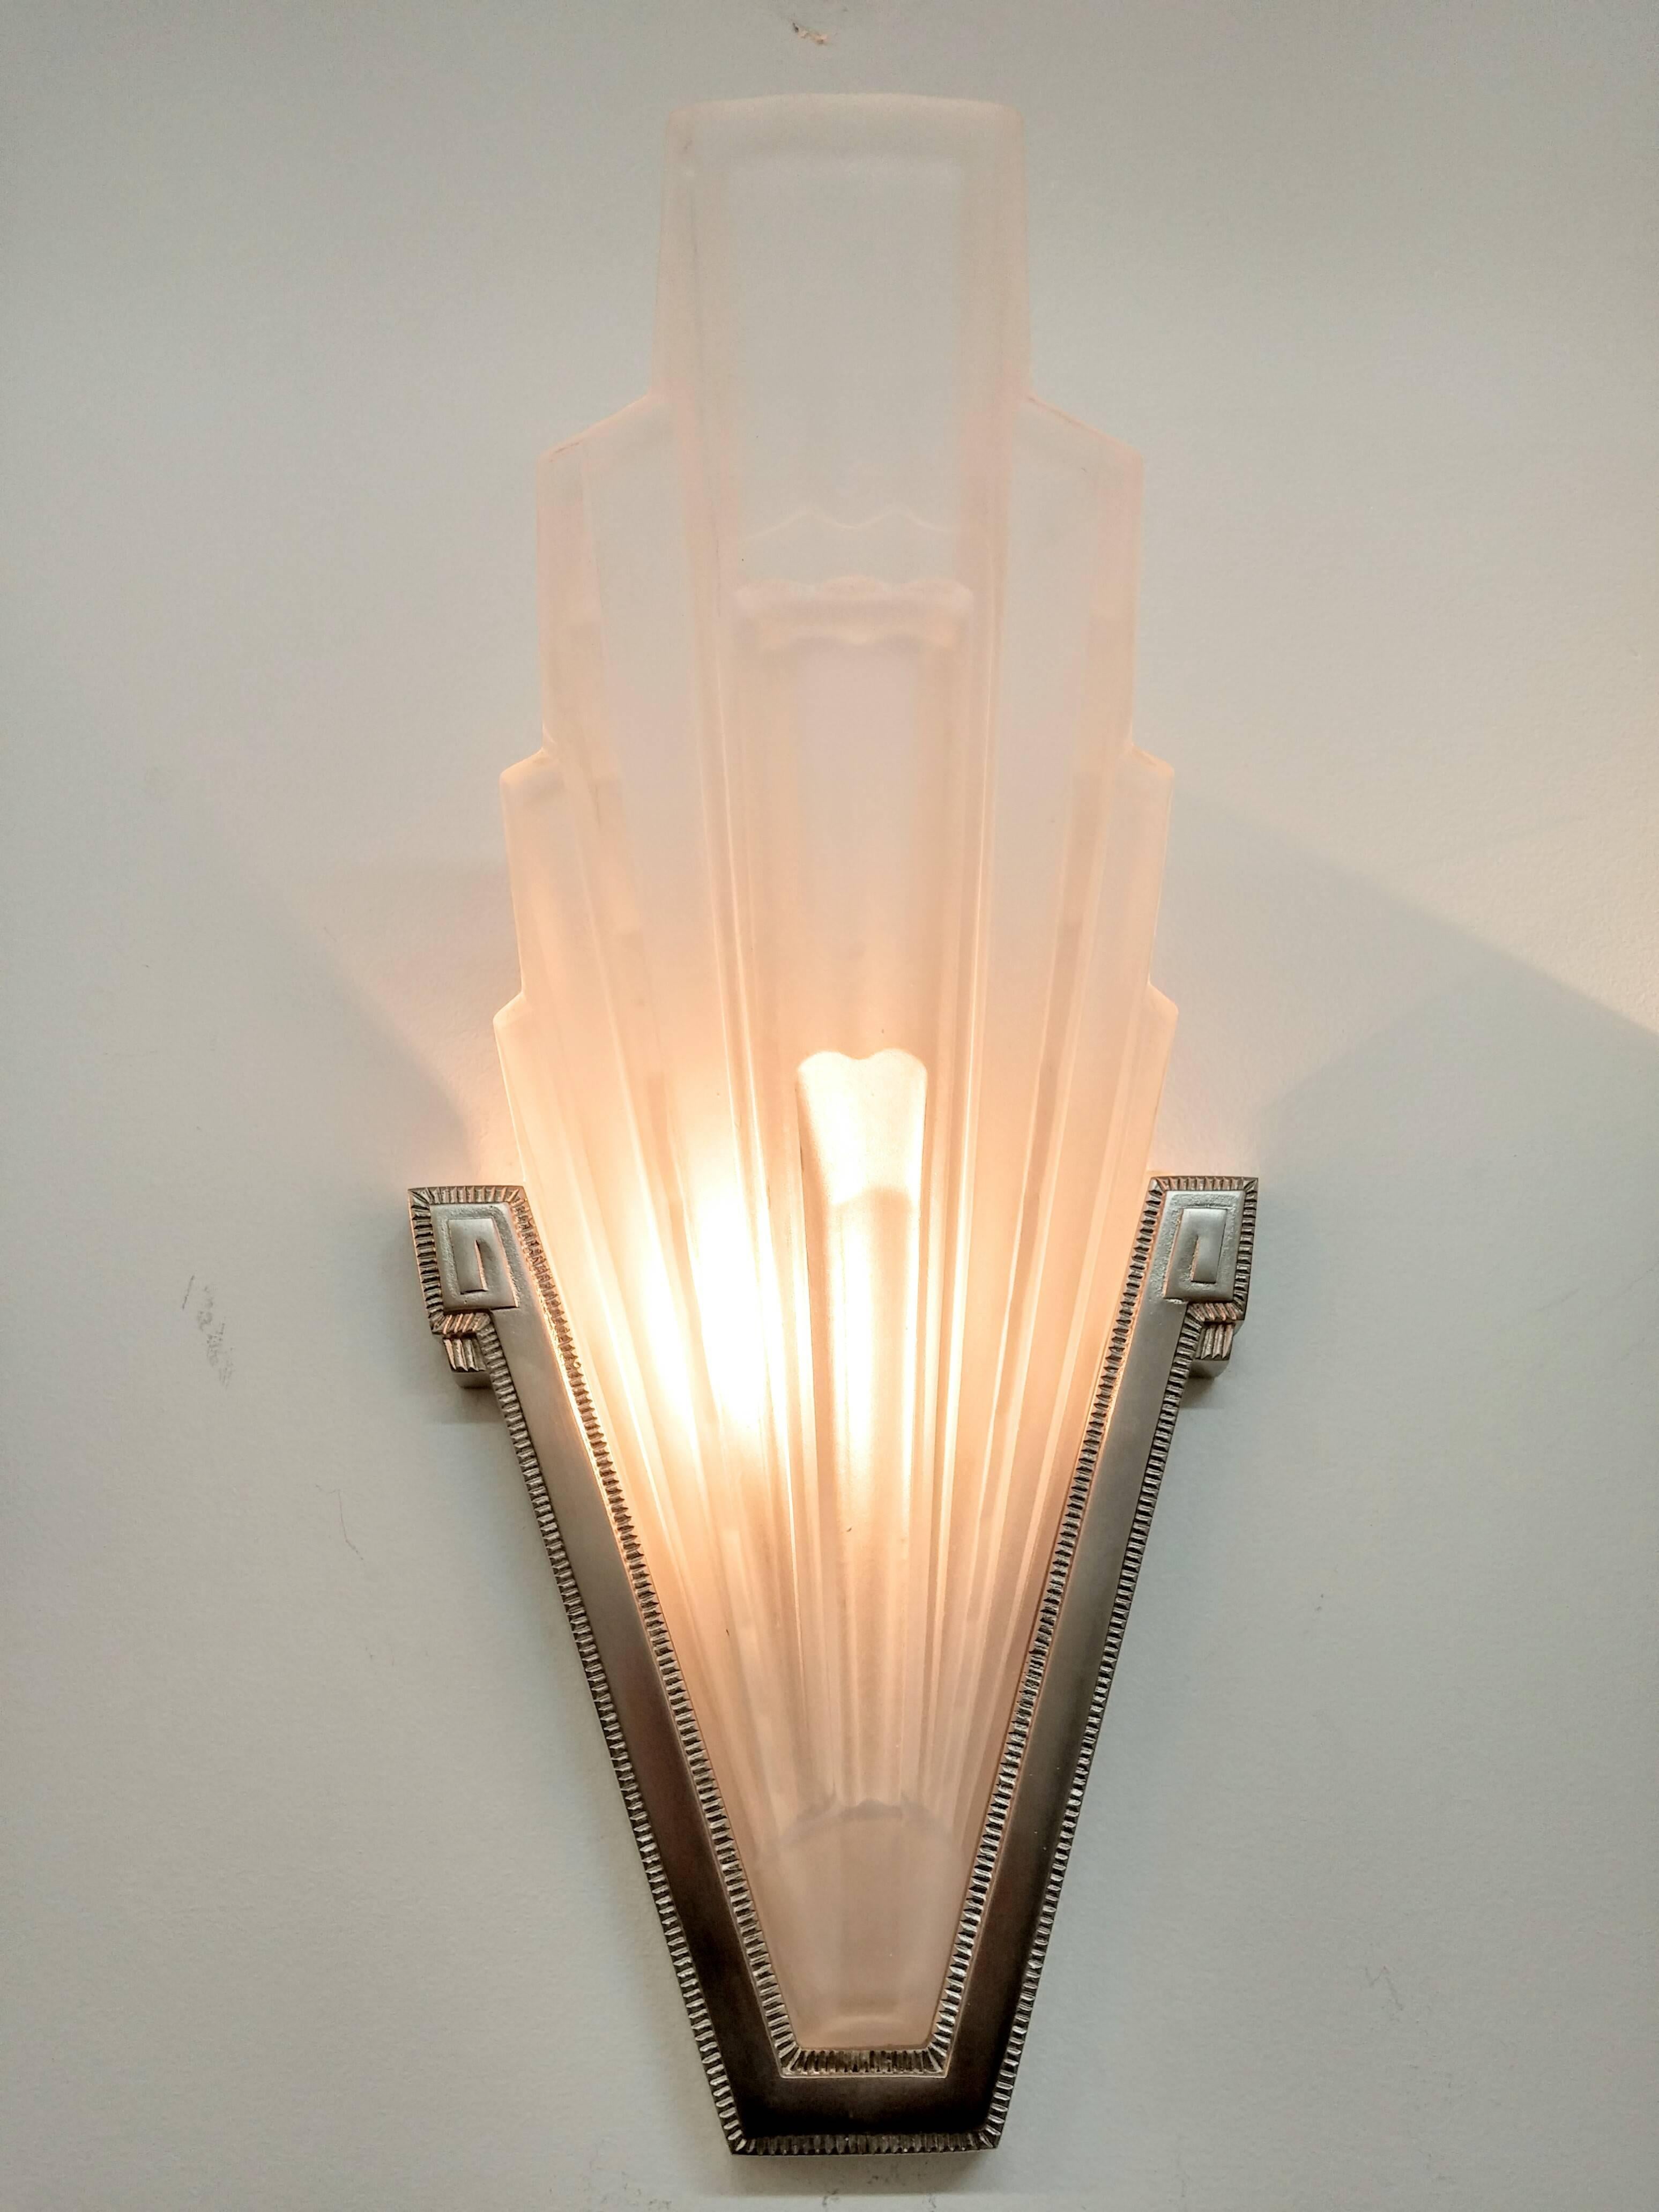 
A pair of French Art Deco wall sconces created by French artist 